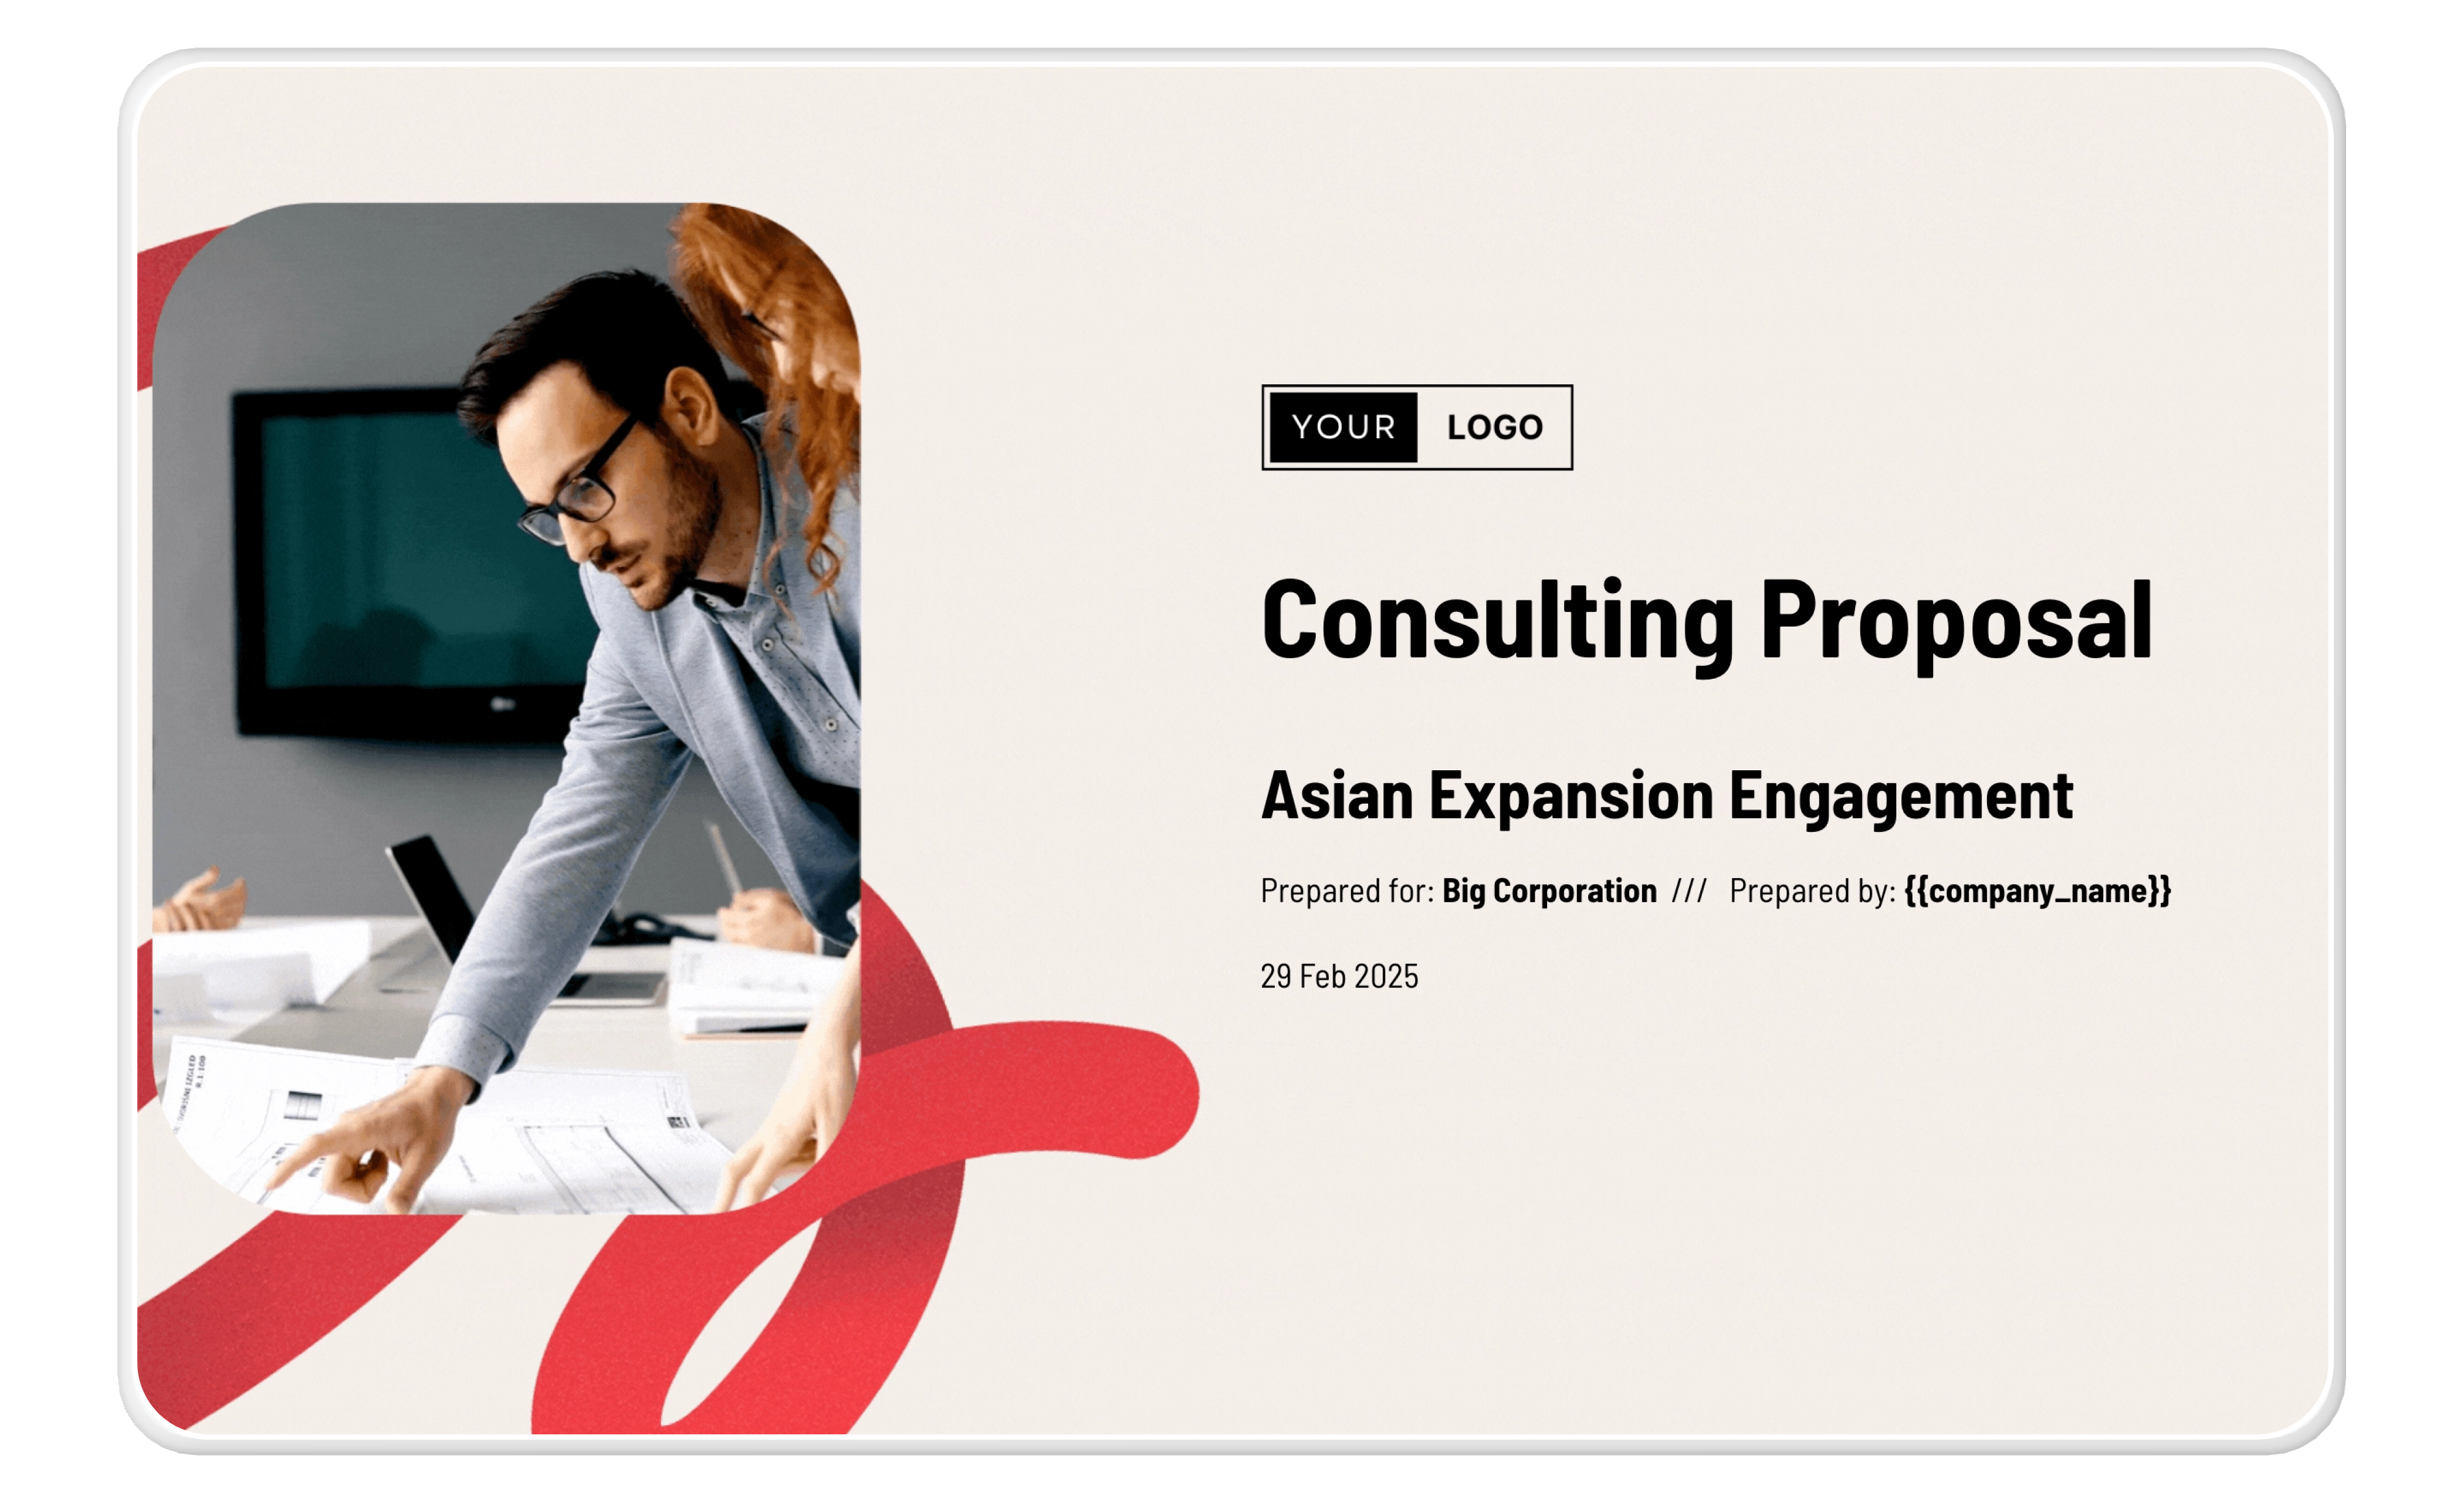 a consulting proposal for asian expansion engagement